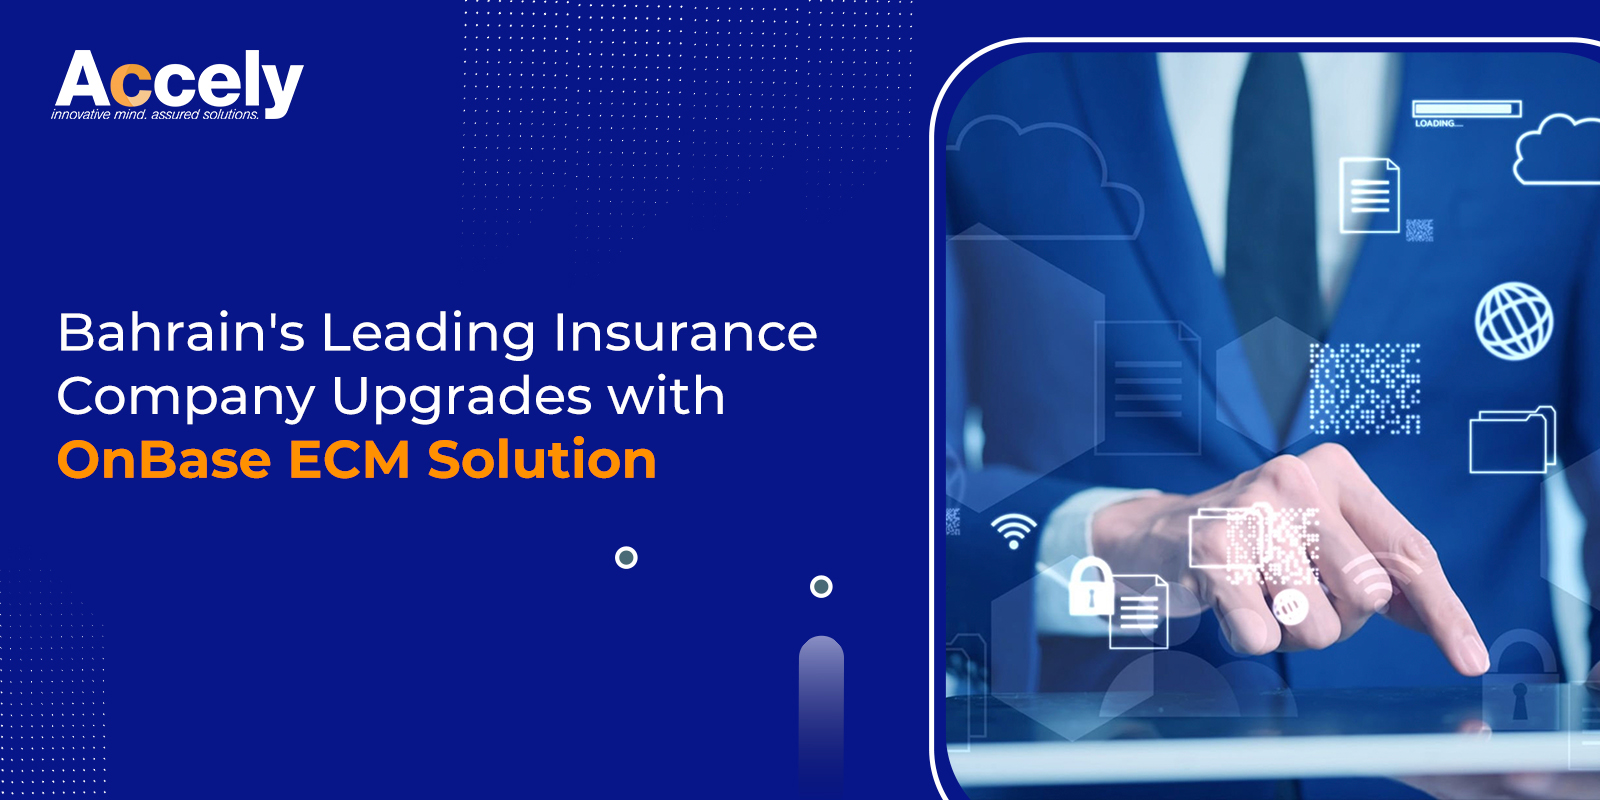 Bahrain's Leading Insurance Company Upgrades with OnBase ECM Solution